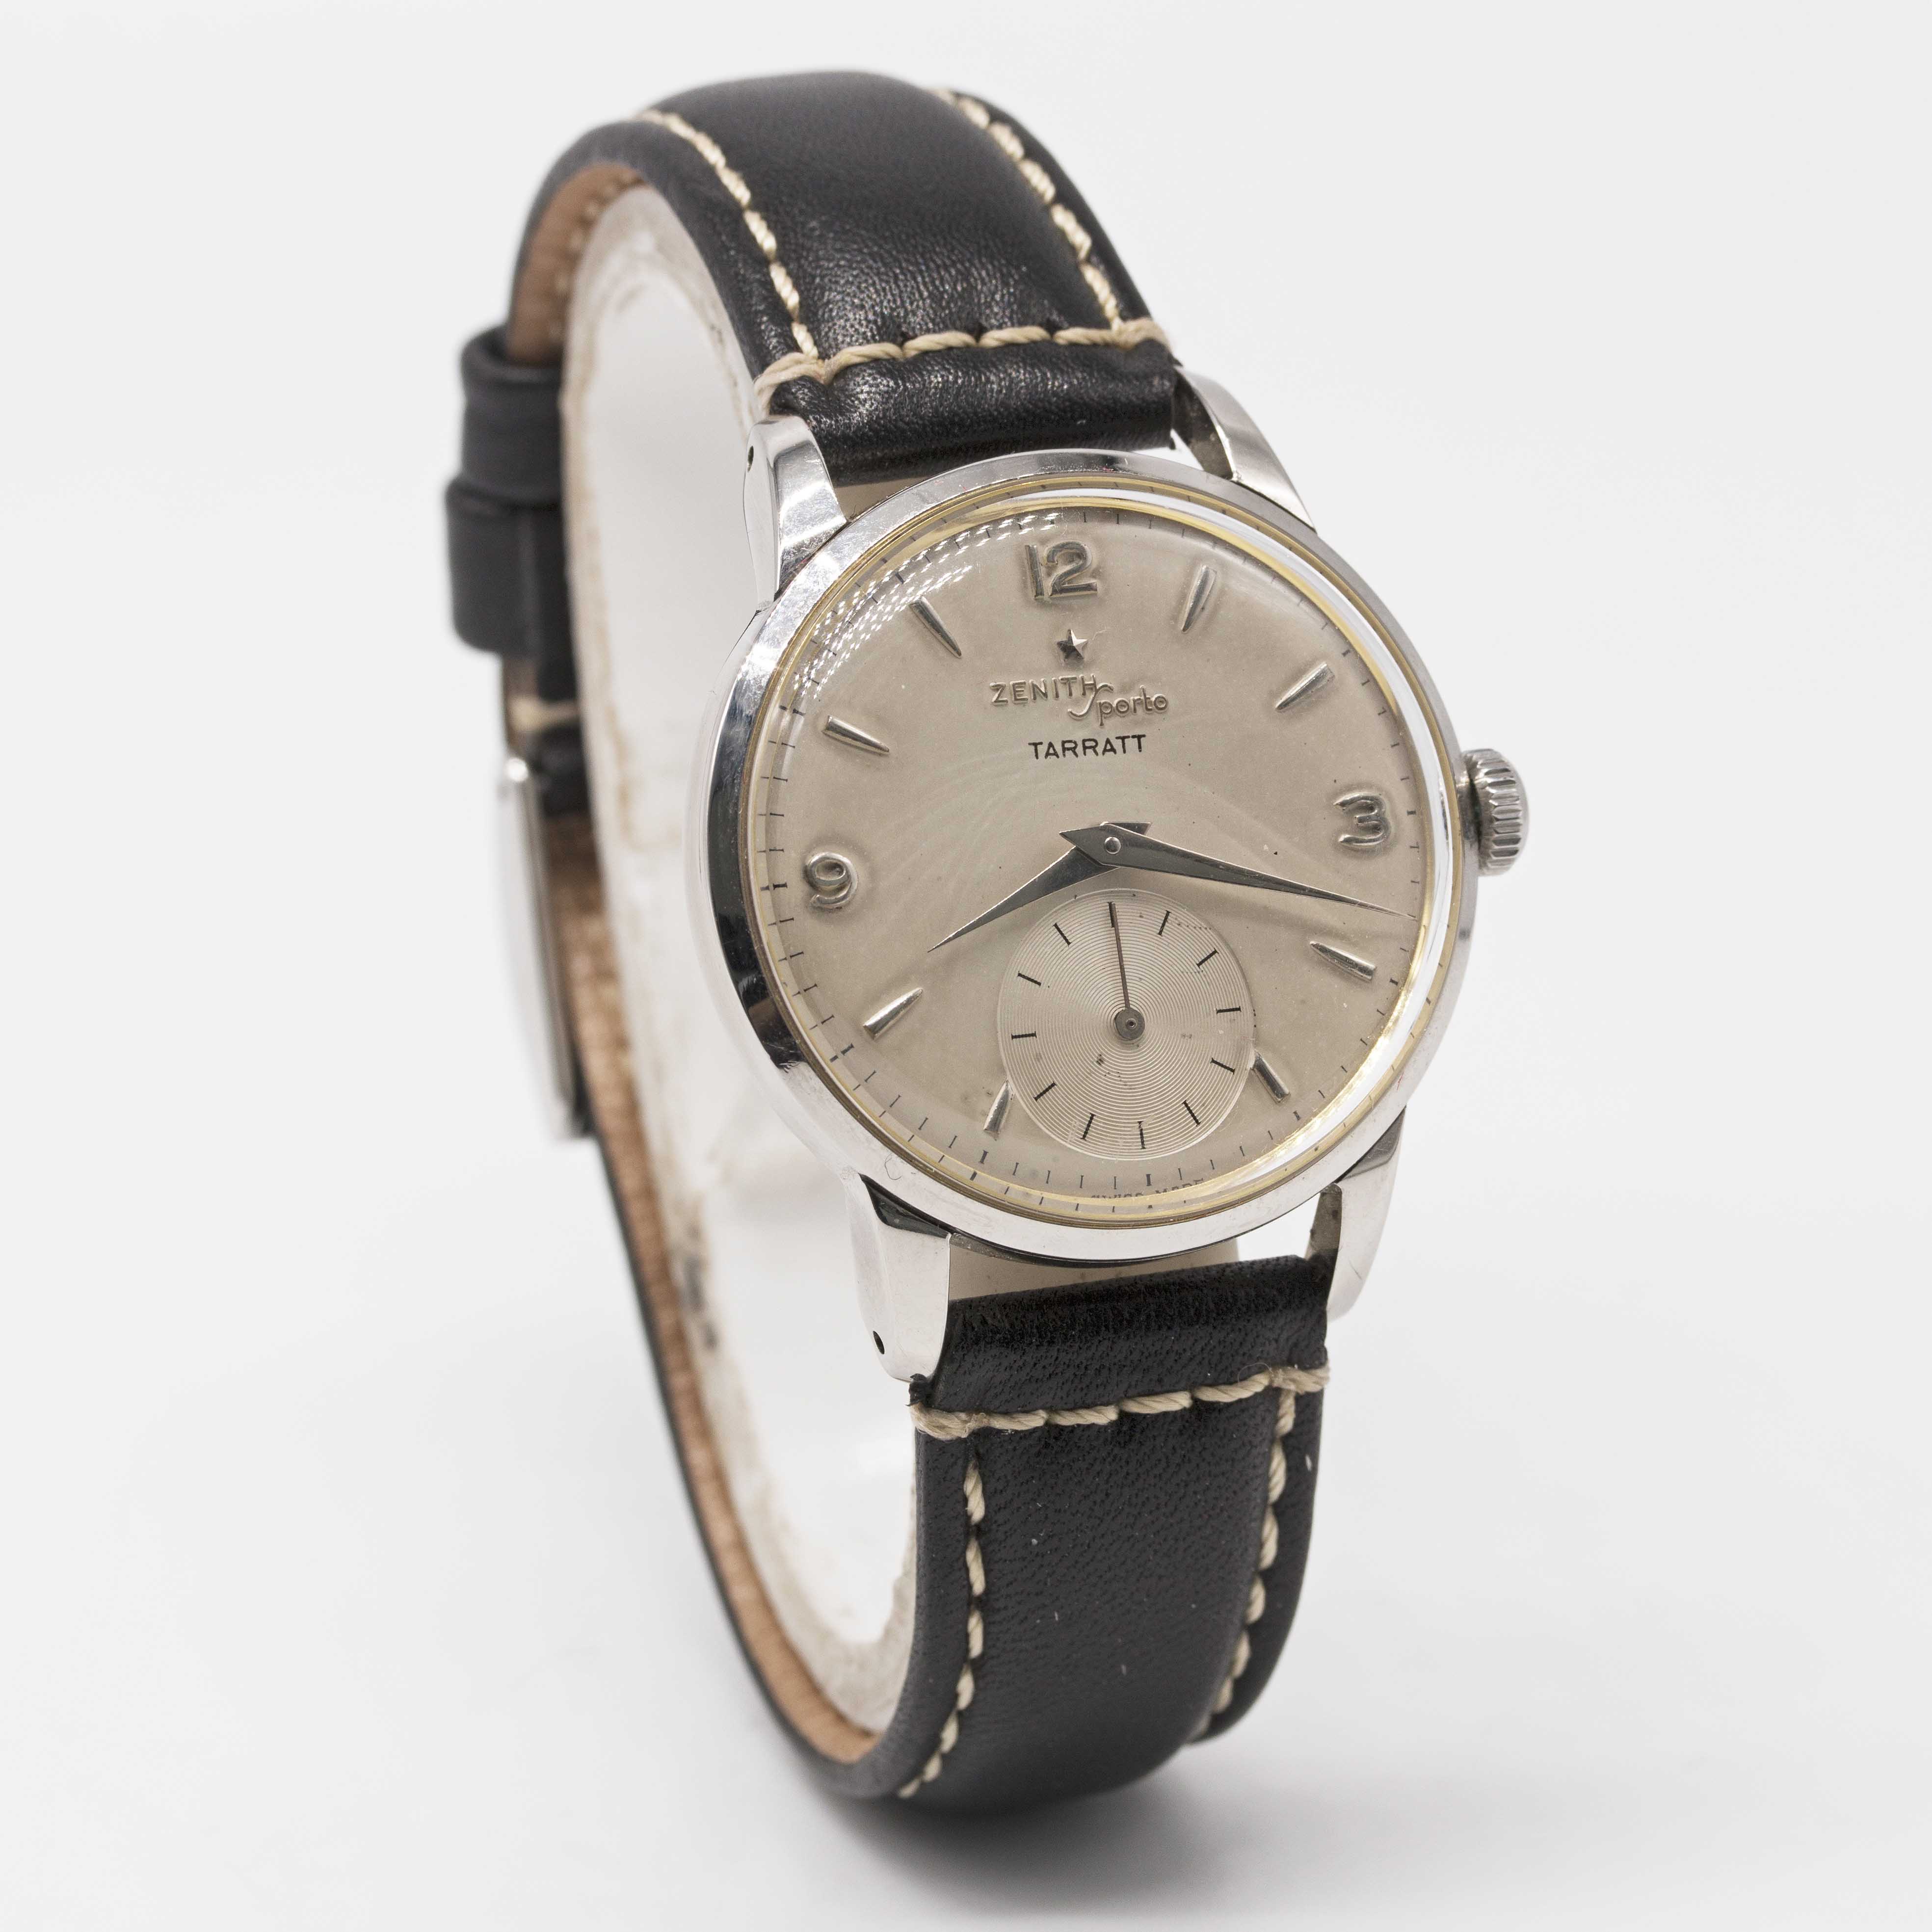 A GENTLEMAN'S STAINLESS STEEL ZENITH SPORTO WRIST WATCH CIRCA 1960, RETAILED BY TARRATT WITH CO- - Image 4 of 8